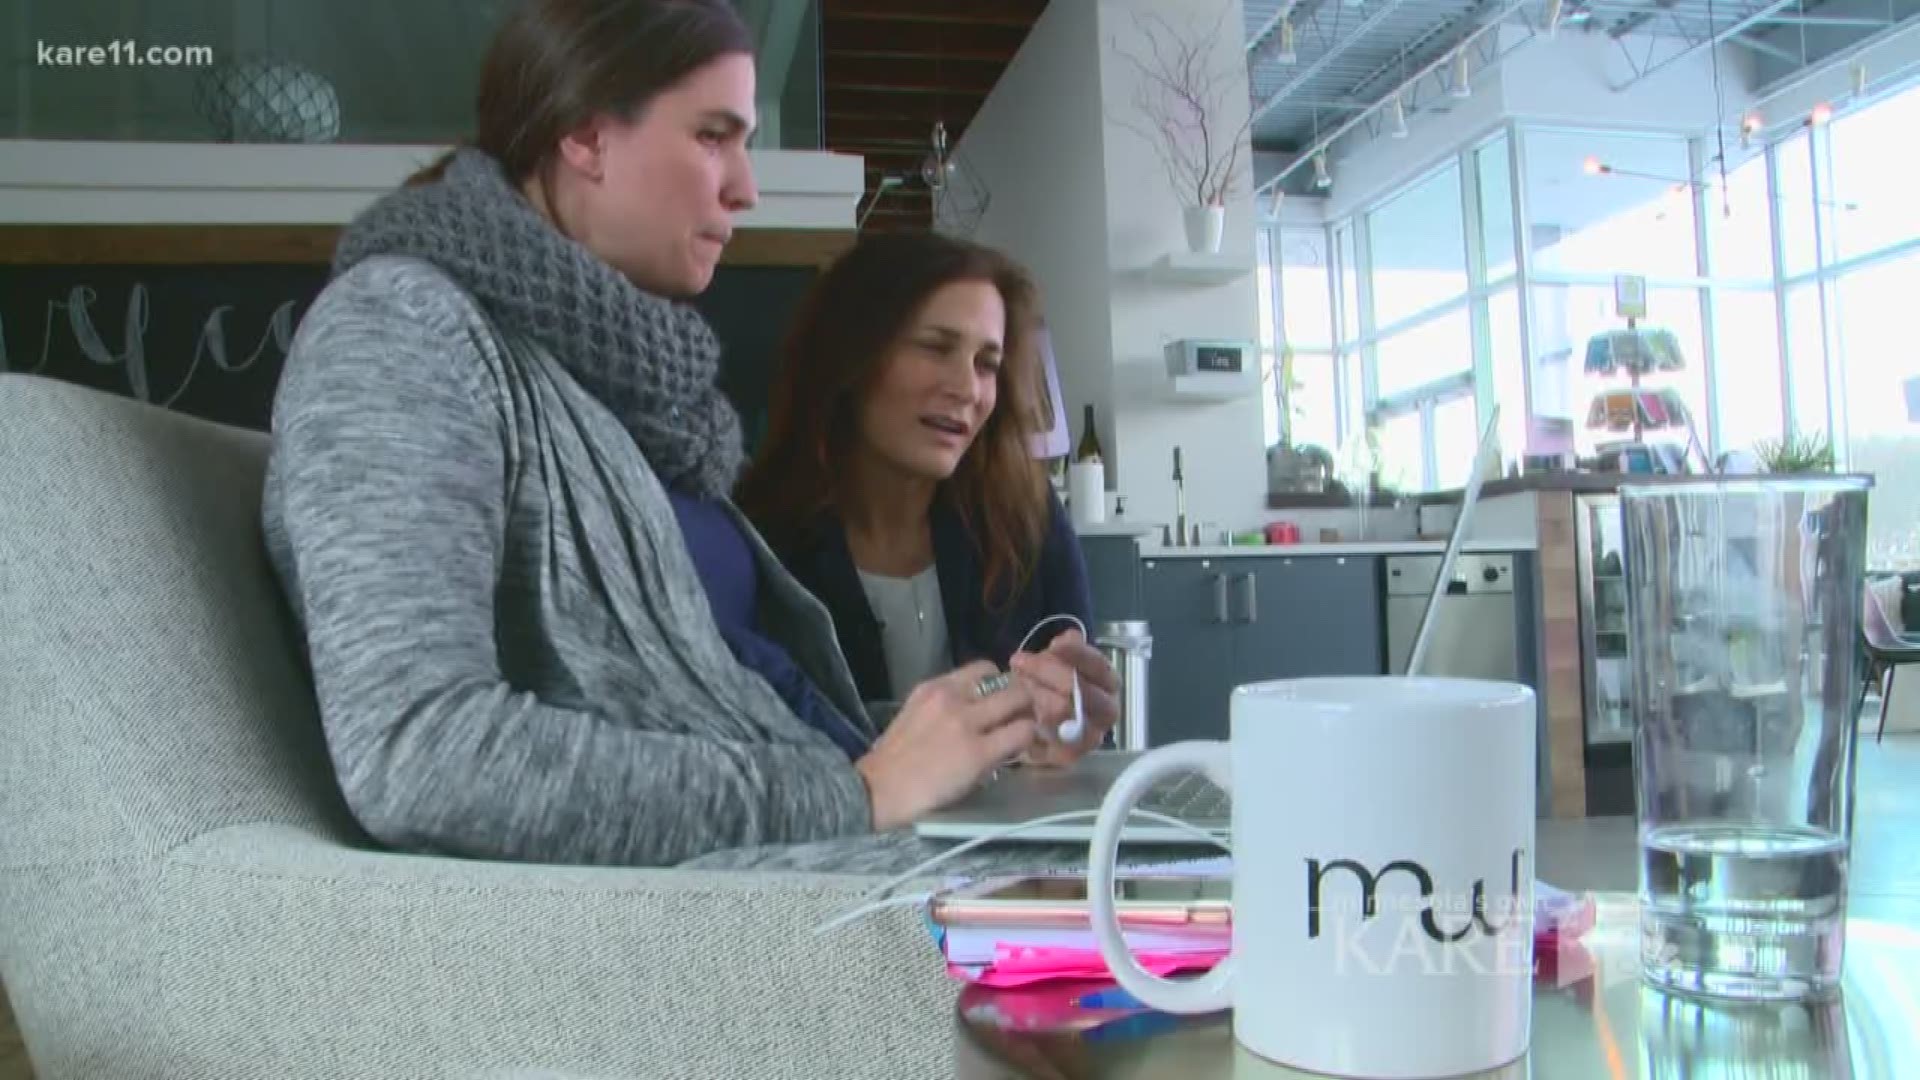 Imagine a place where work and wellness blend into one. Julie Burton had that vision and turned it into reality. https://kare11.tv/2wqPWcH